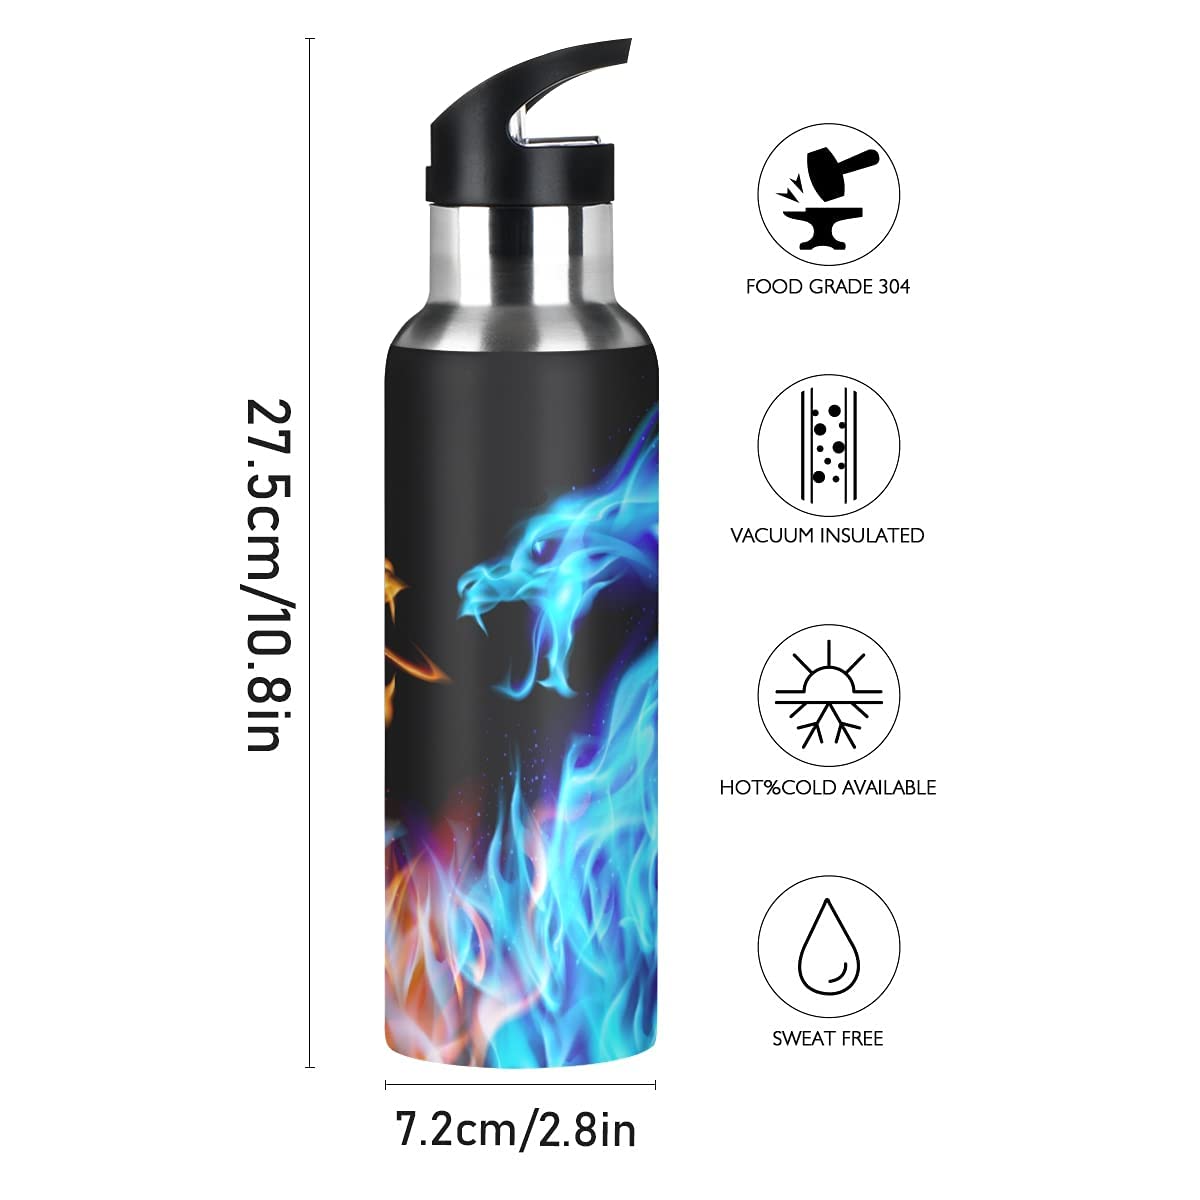 Dragon Water Bottle Kids Fire Dragon Thermos Bottle with Straw Lid for Boys Leakproof Insulated Stainless Steel Water Flask School Bottle 20 oz